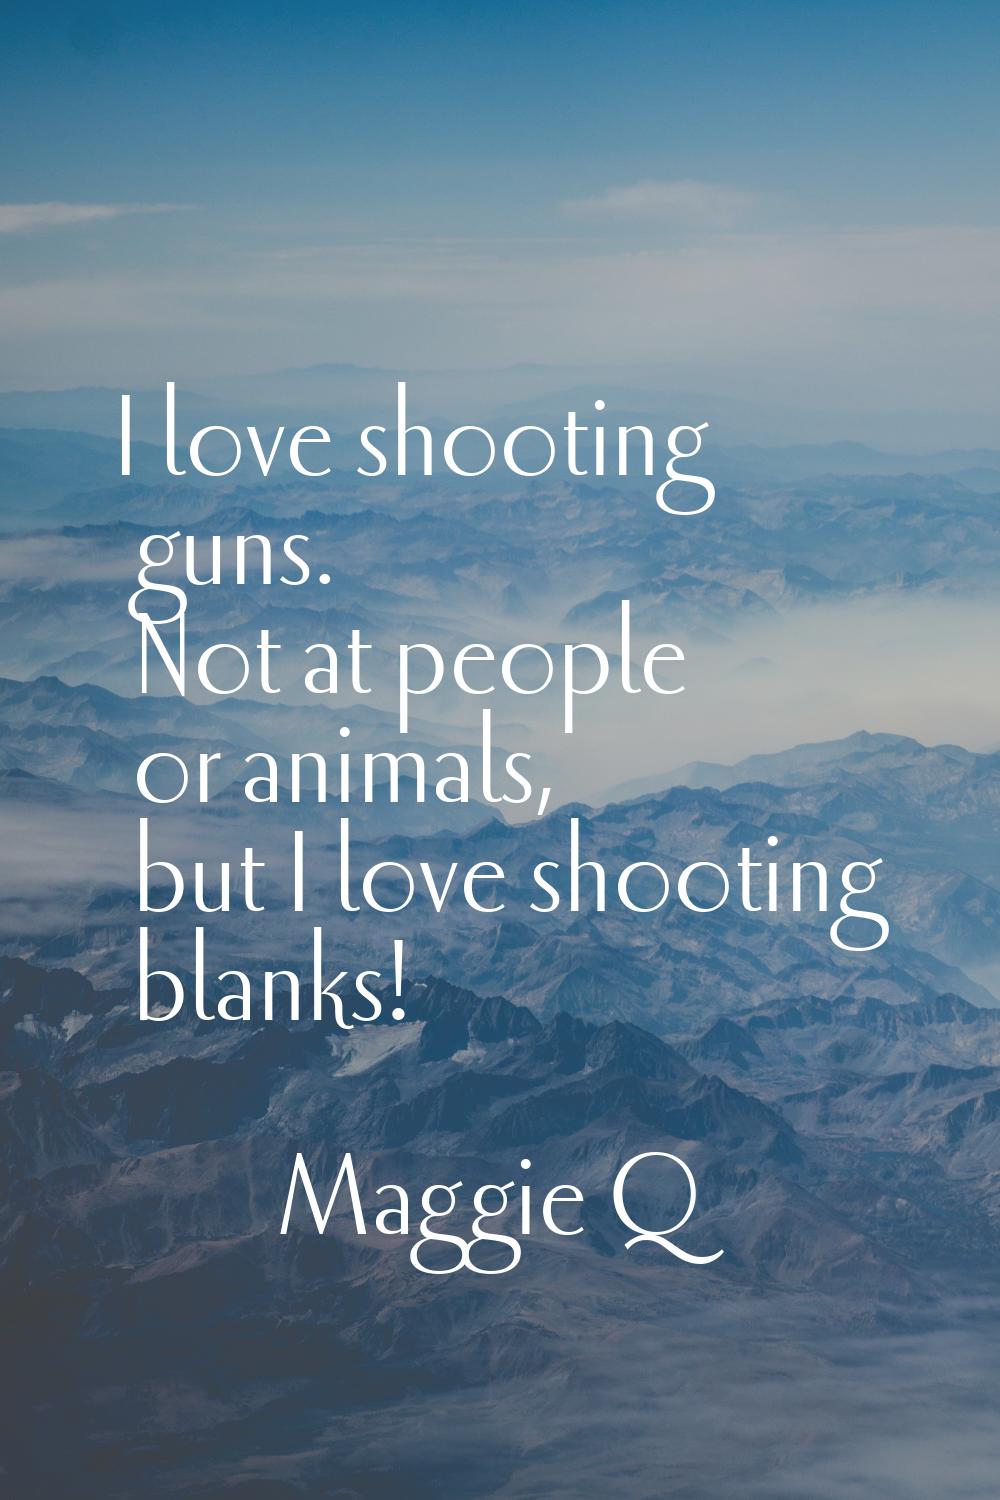 I love shooting guns. Not at people or animals, but I love shooting blanks!